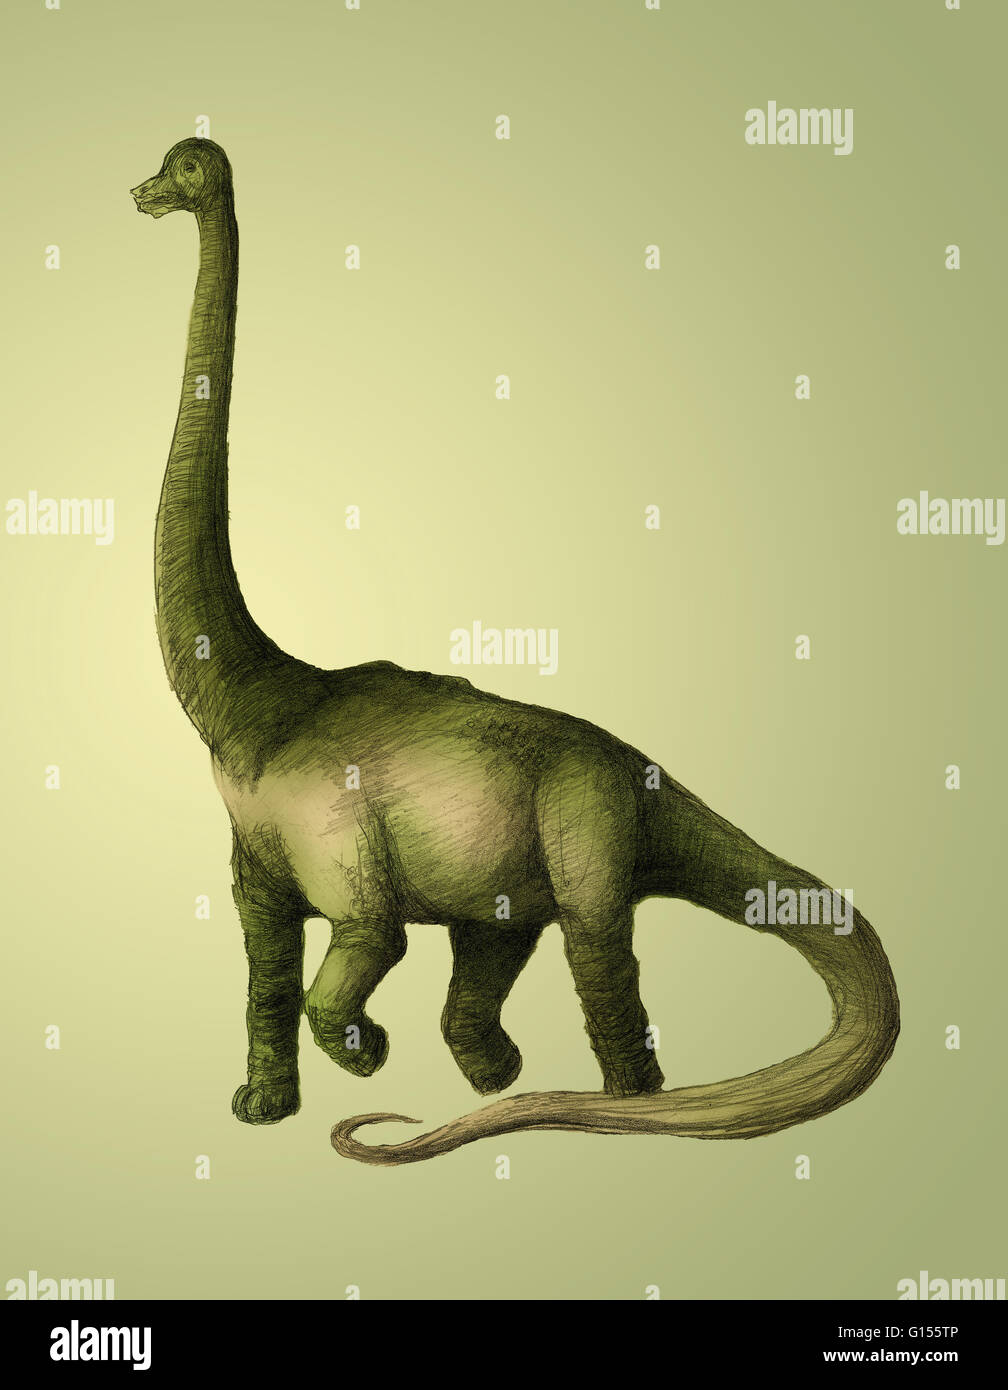 Brachiosaurus dinosaur, artwork. Brachiosaurus was the tallest dinosaur, standing up to 16 meters tall. Unusually for a dinosaur, its front legs were longer than its hind legs. It is thought that it fed on the high leaves of trees, as giraffes do today. F Stock Photo